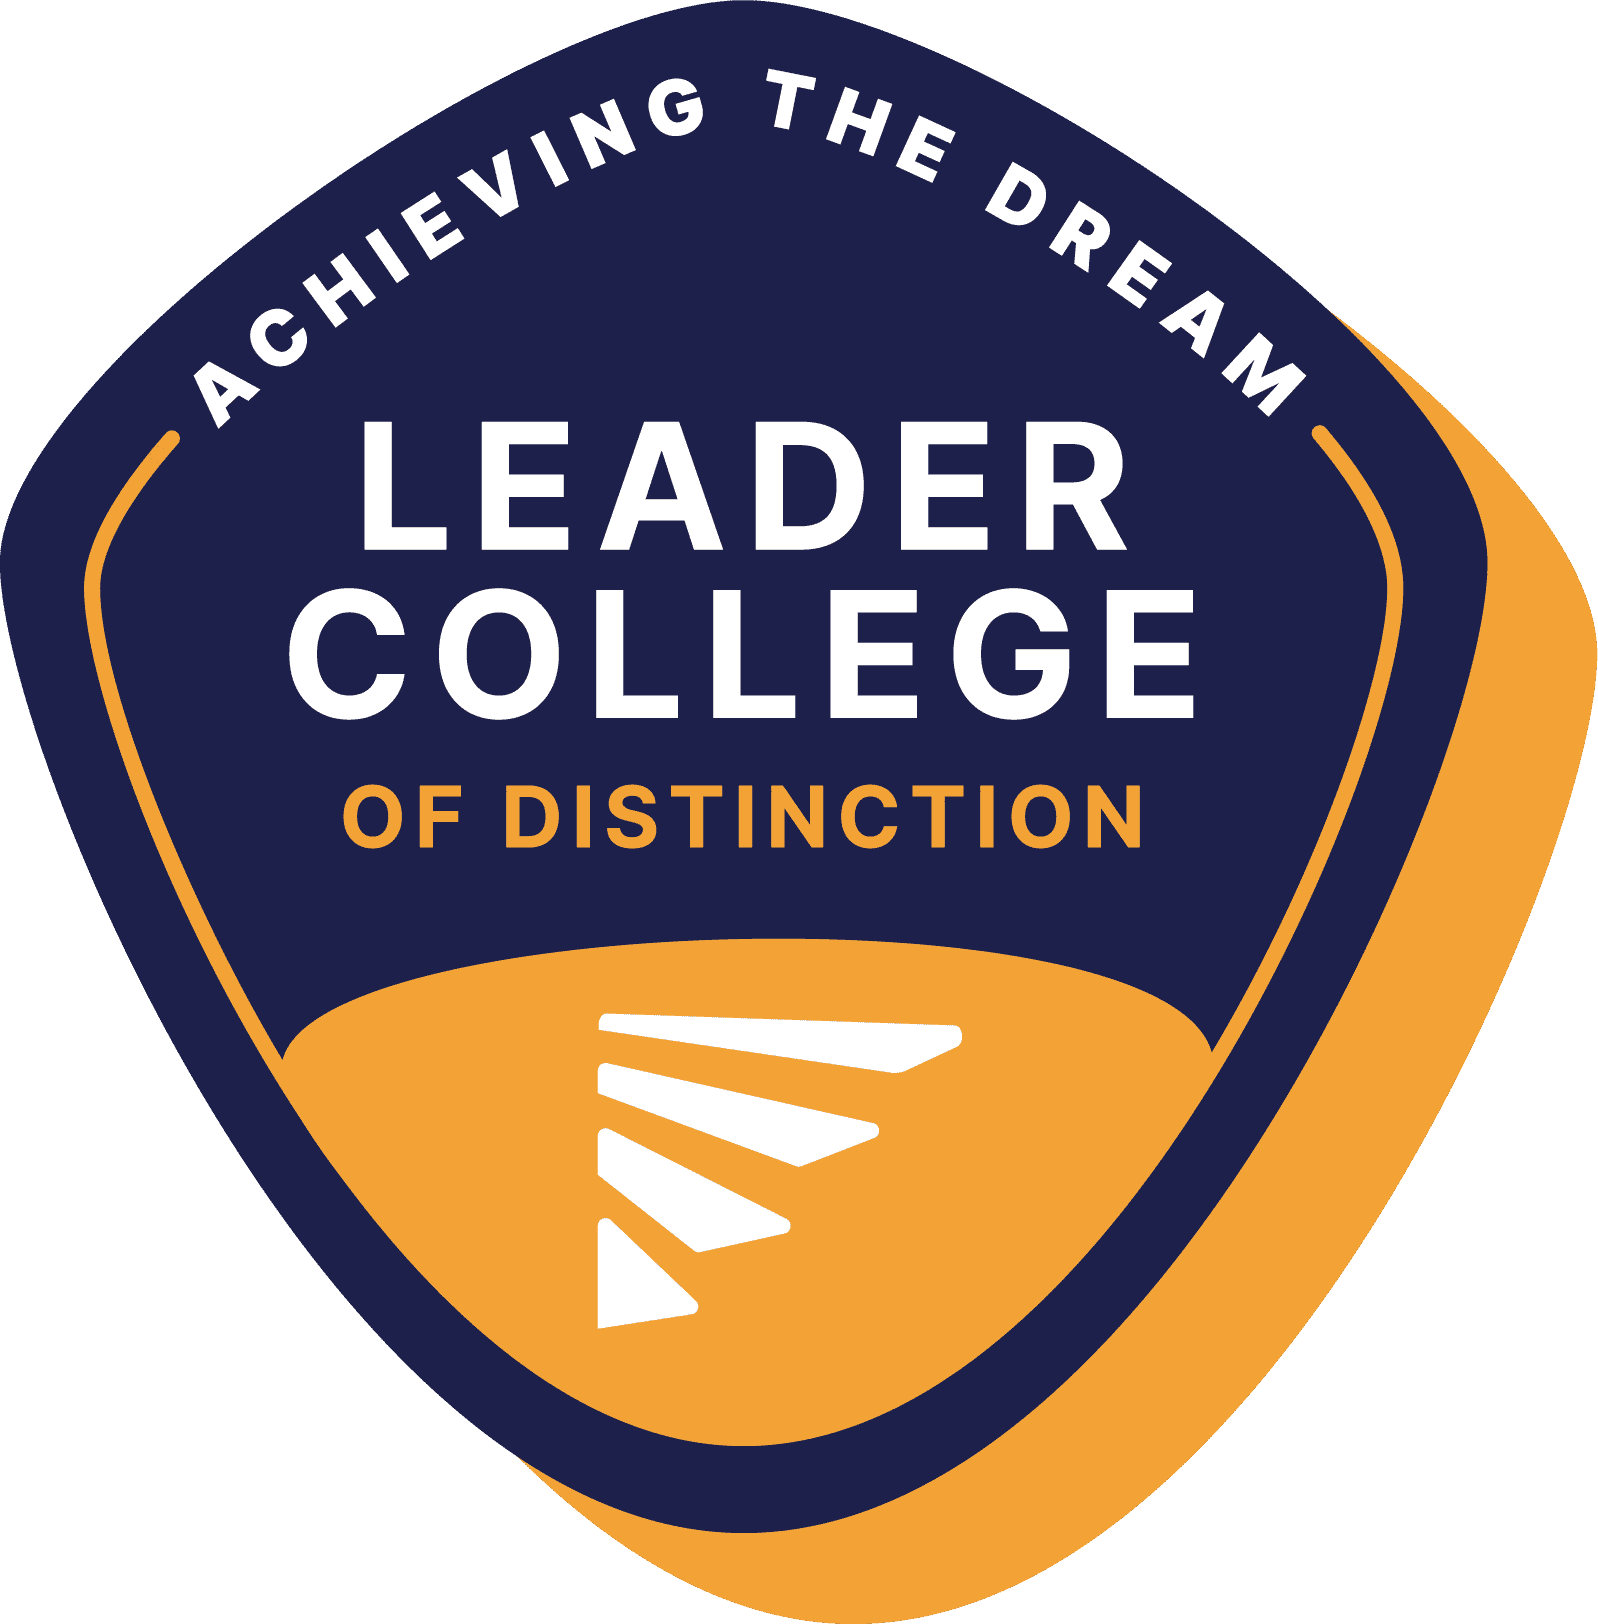 Achieving the Dream Leader College of Distinction